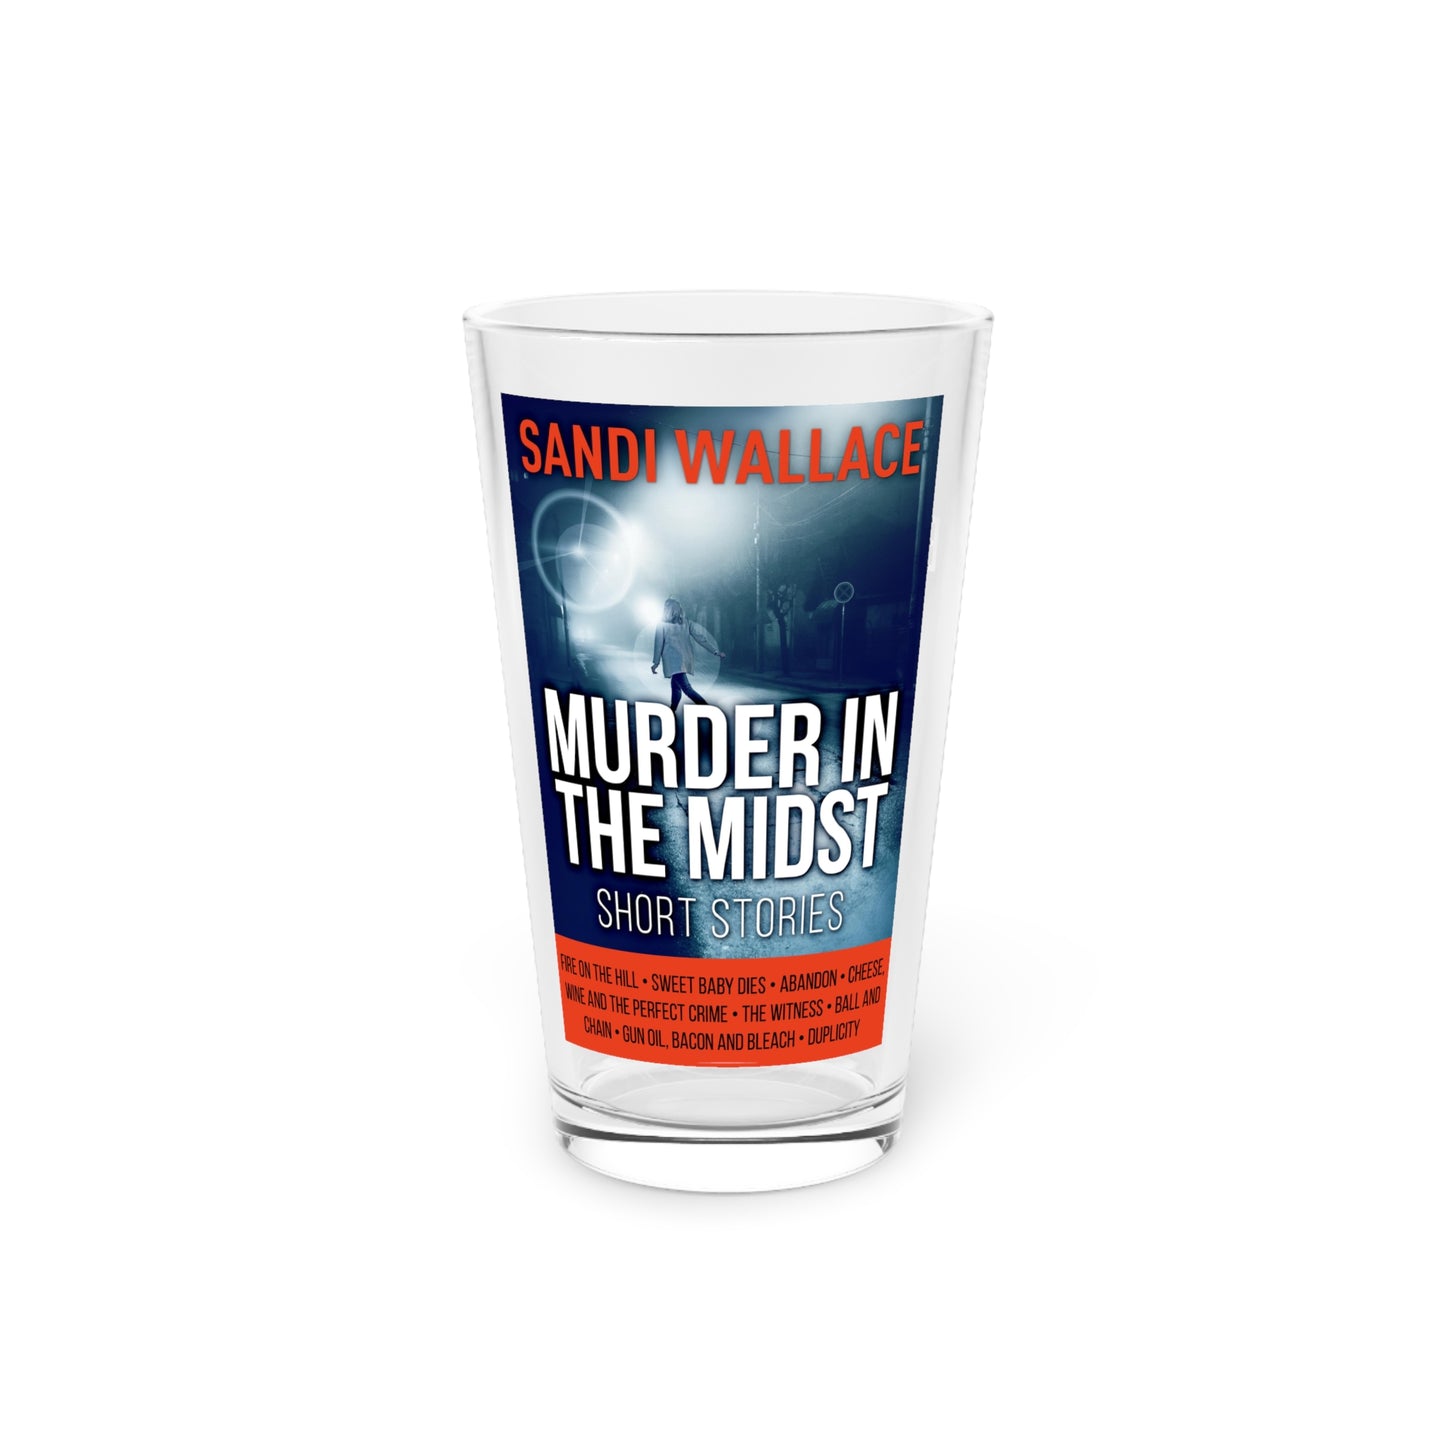 Murder In The Midst - Pint Glass